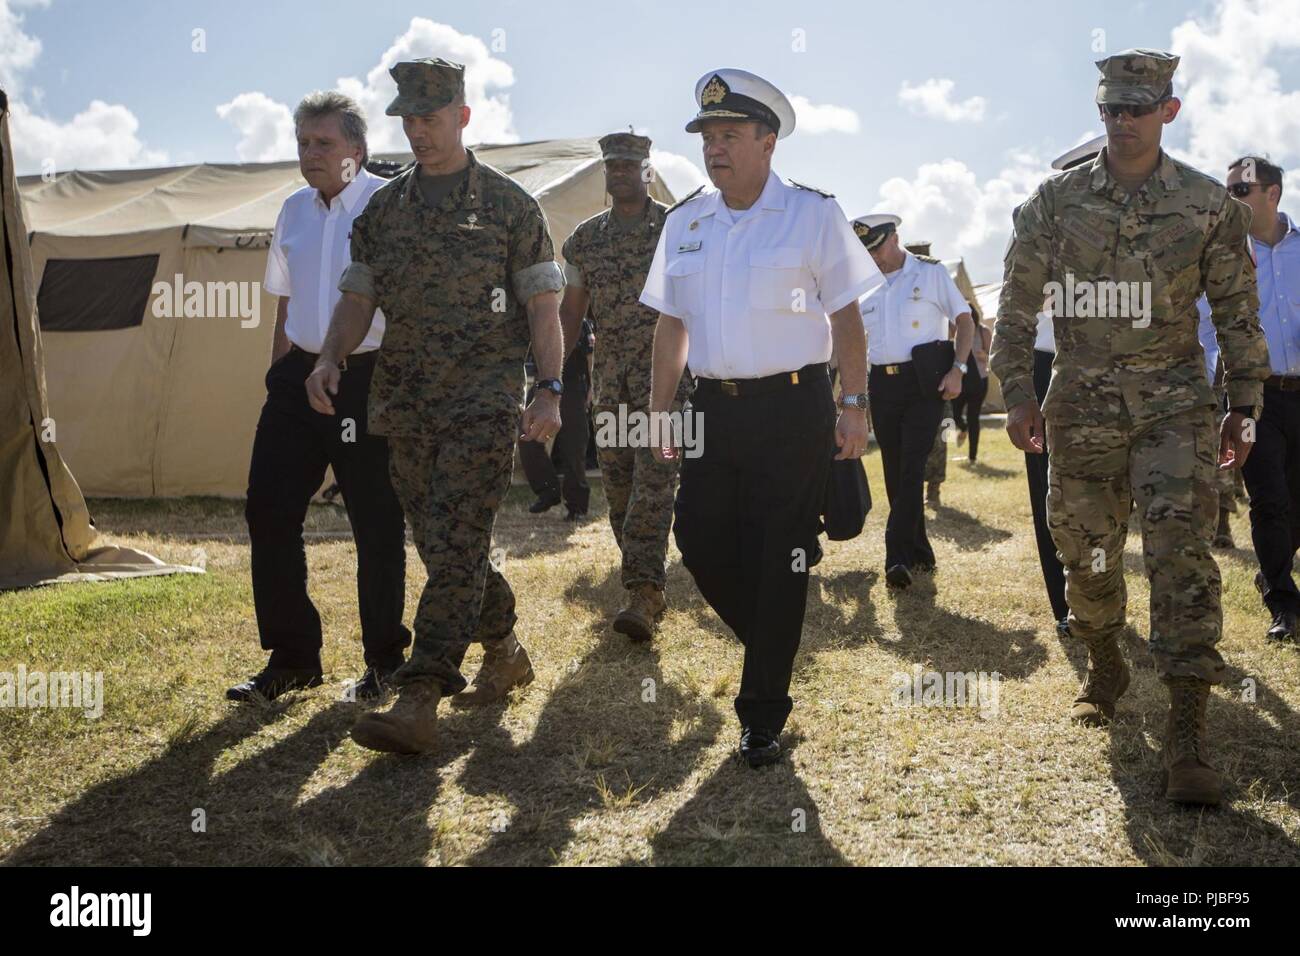 MARINE CORPS BASE HAWAII (July 11, 2018) Alberto Espina, Chilean Minister of Defense, U.S. Marine Corps Brig. Gen. Mark Hashimoto, component commander, Fleet Marine Force, and Chilean Navy Adm. Julio Leiva, Chilean Navy Commander-in-Chief, explore tent city during the Rim of the Pacific (RIMPAC) exercise on Marine Corps Base Hawaii July 11, 2018. RIMPAC provides high-value training for task-organized, highly capable Marine Air-Ground Task Force and enhances the critical crisis response capability of U.S. Marines in the Pacific. Marines in the Pacific. Twenty-five nations, 46 ships, five submar Stock Photo